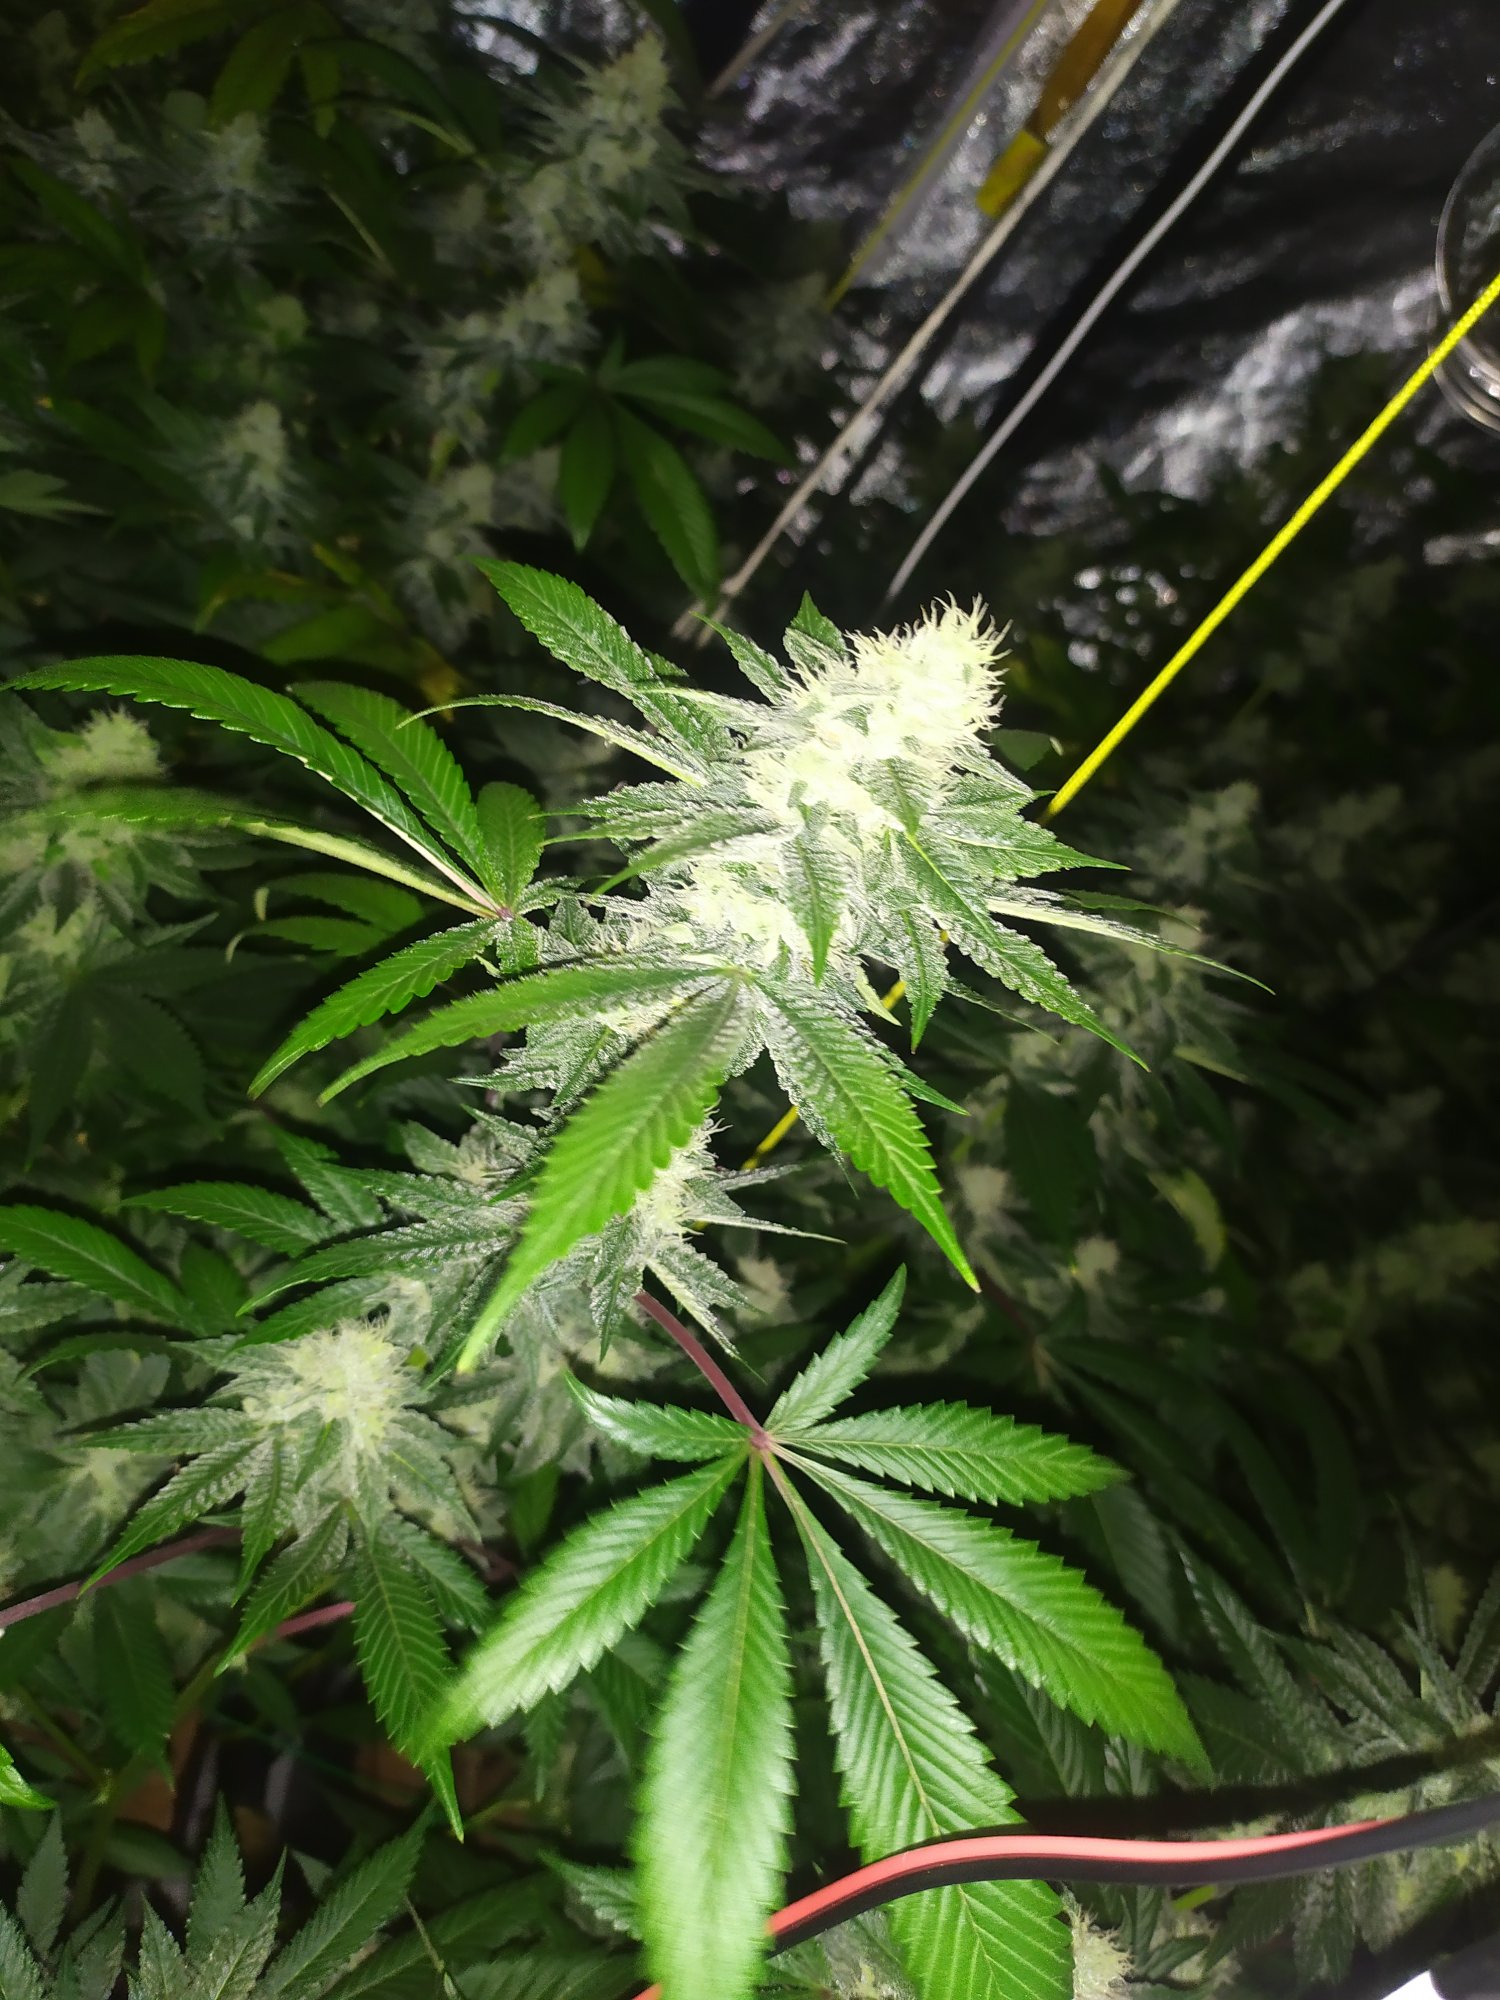 Tips for growing the original gg4 cut 2